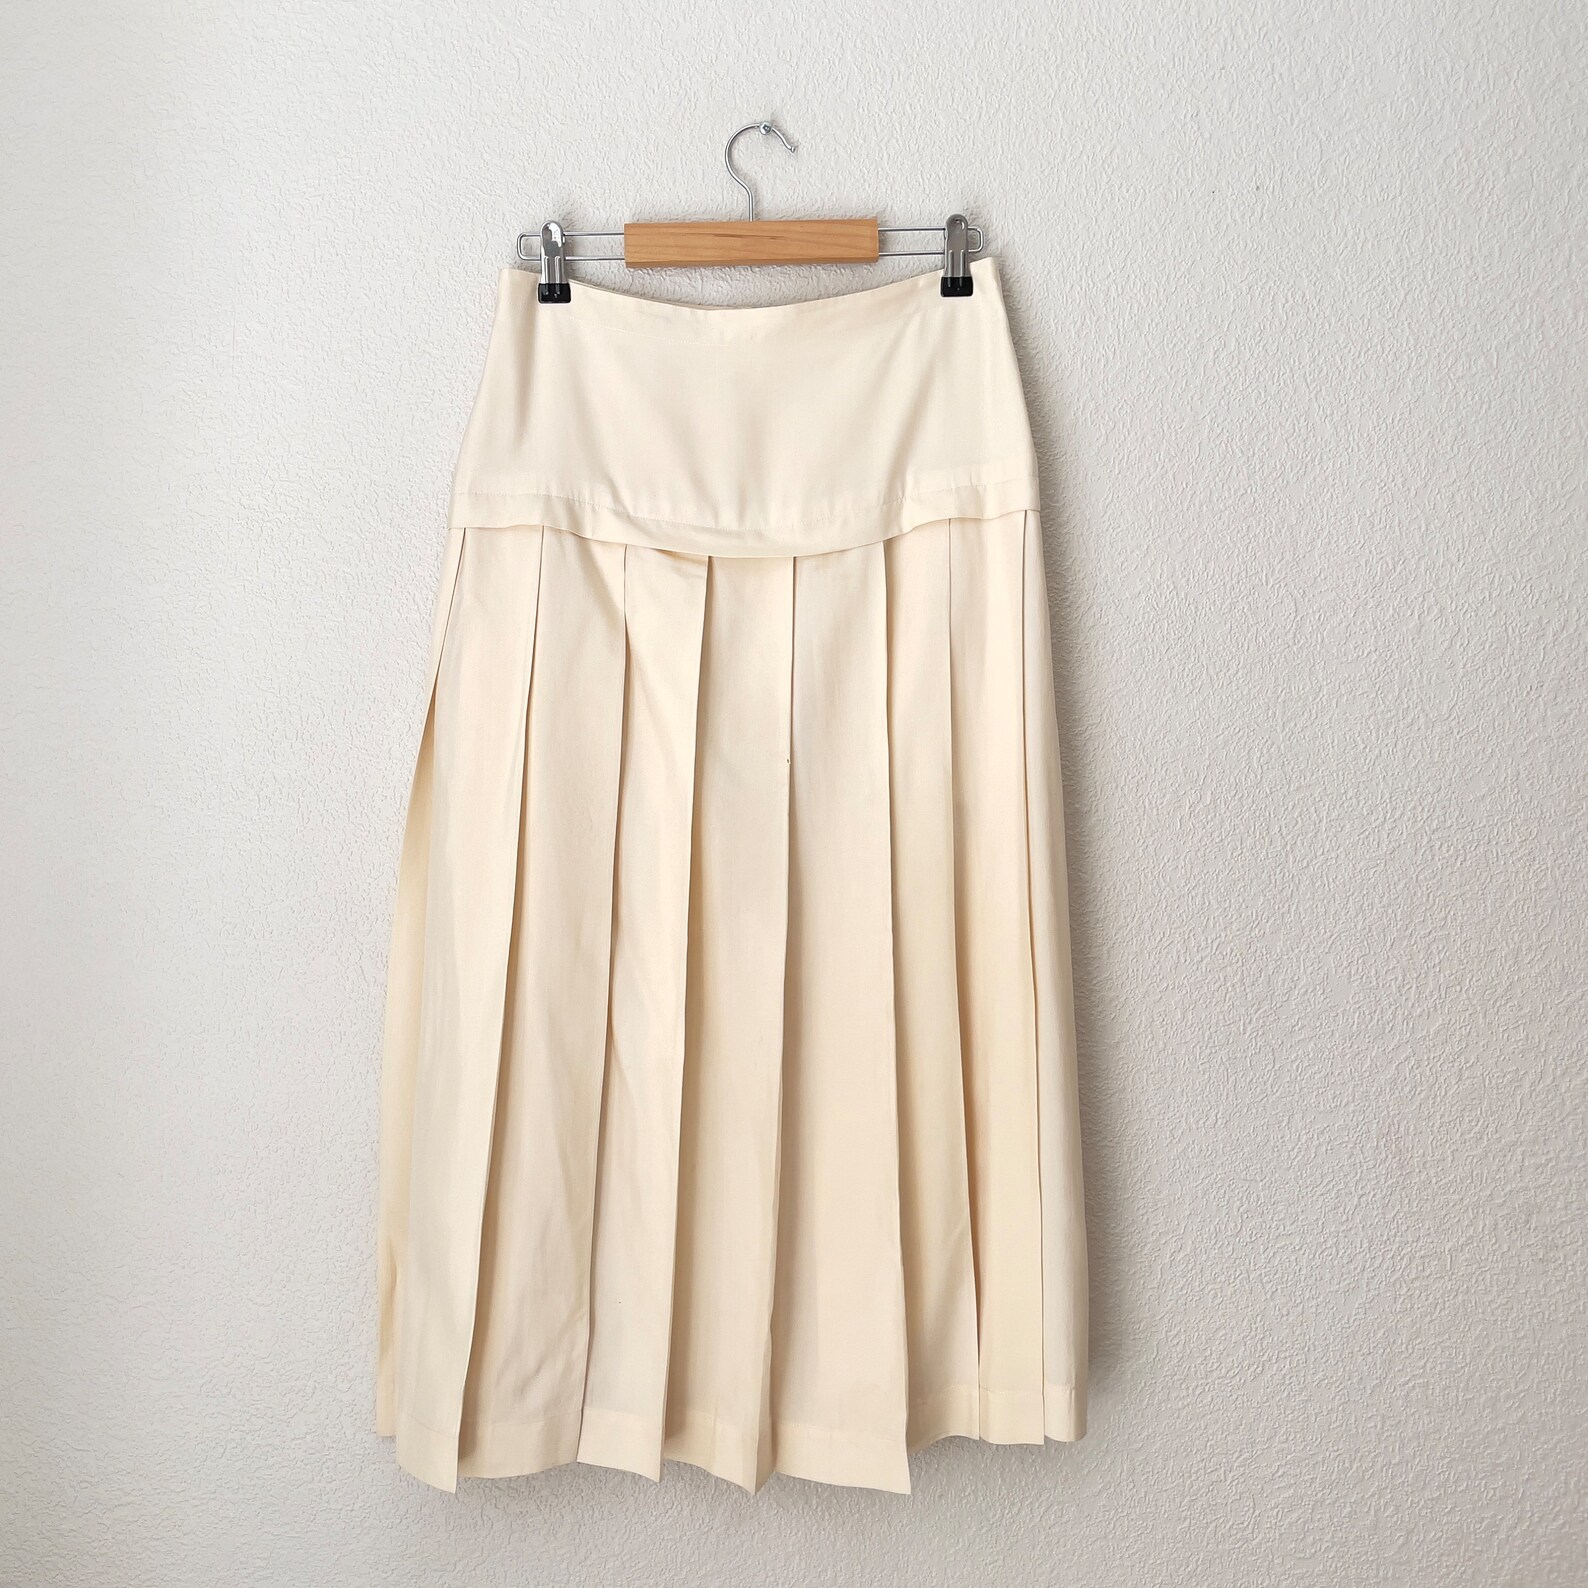 You Will Want to See These Skirt Trends to Try in 2023 (& 2024!)